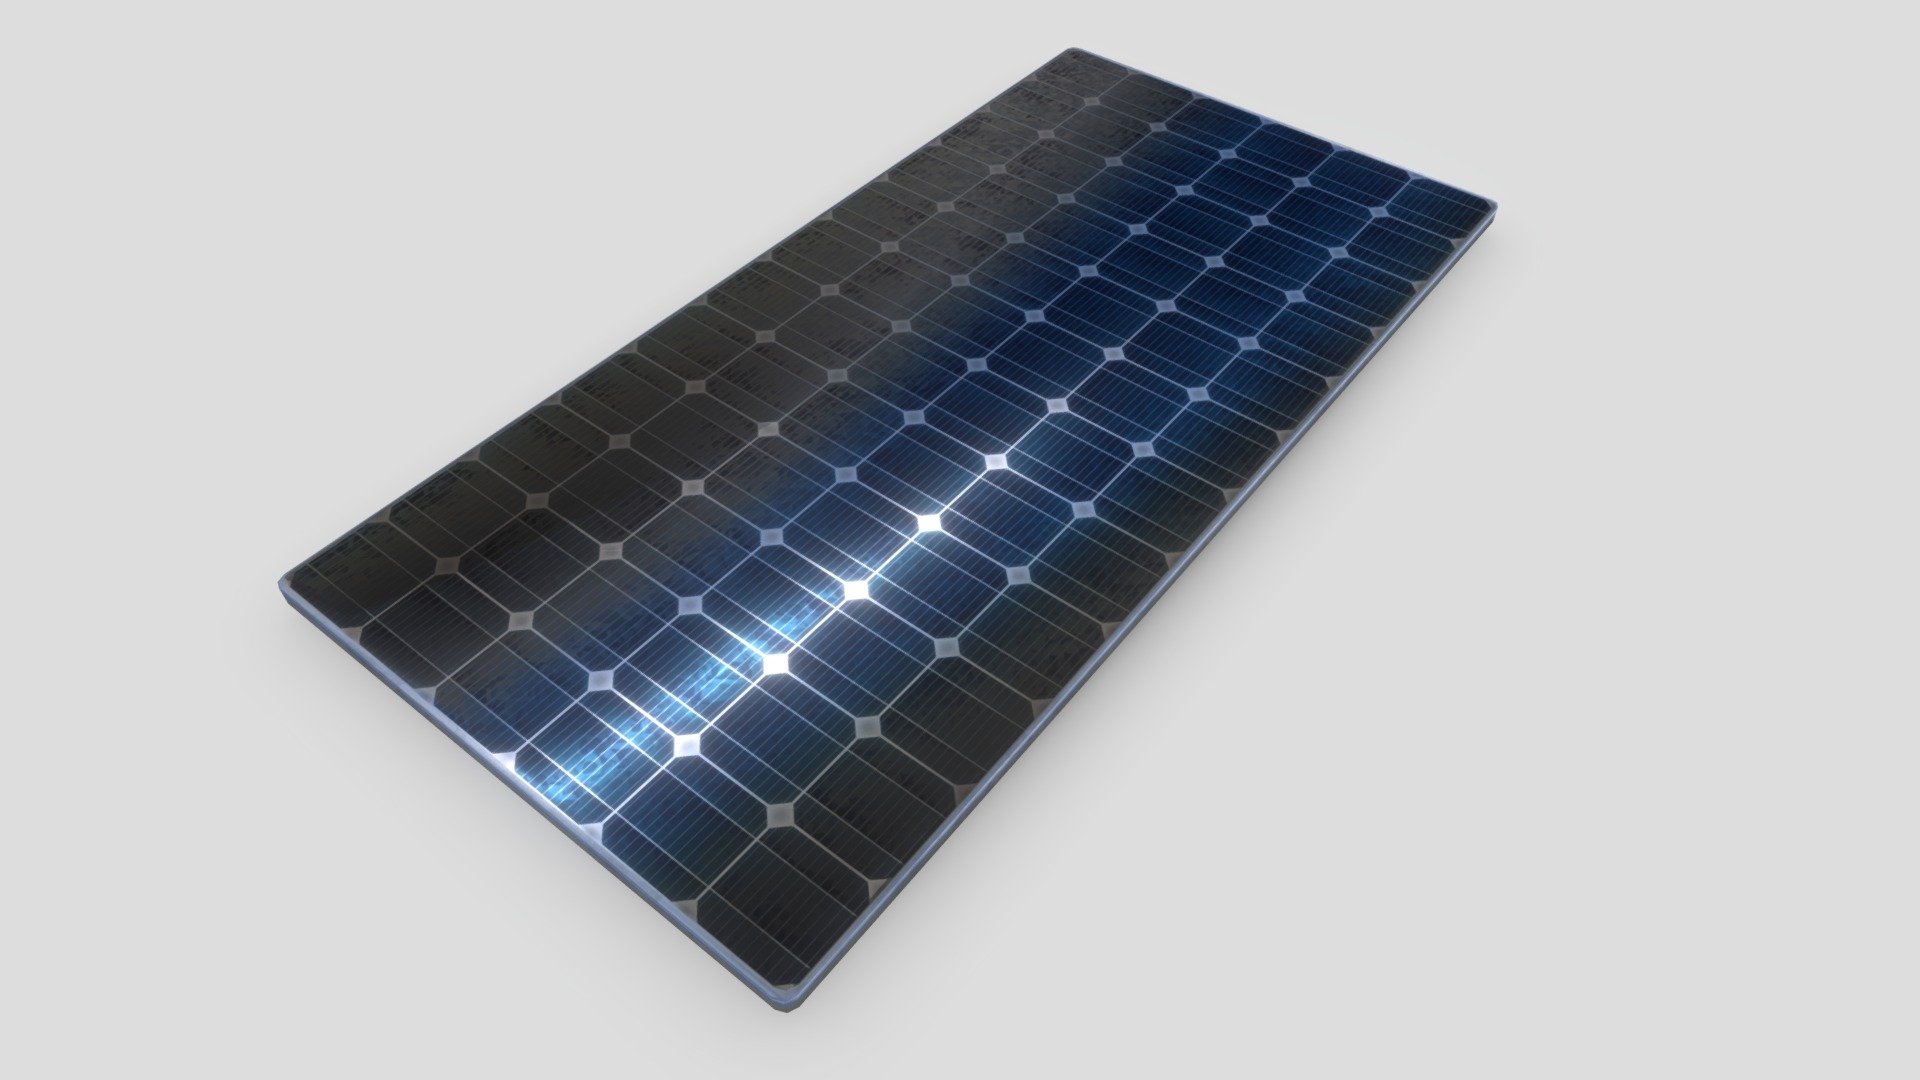 Very simple 72 Cell solar panel with backed textures. 

Texture files:
- Diffuse
- Roughness
- Metallness
- Normal

Dimensions of the panel:
- x = 1.86 m
- y = 0.935 m
- z = 0.03 m

PBR textures used for baking:
- Metal: ambientCG.com/a/Metal011
- Solar: ambientCG.com/a/SolarPanel003

Free to use for any purpose 3d model